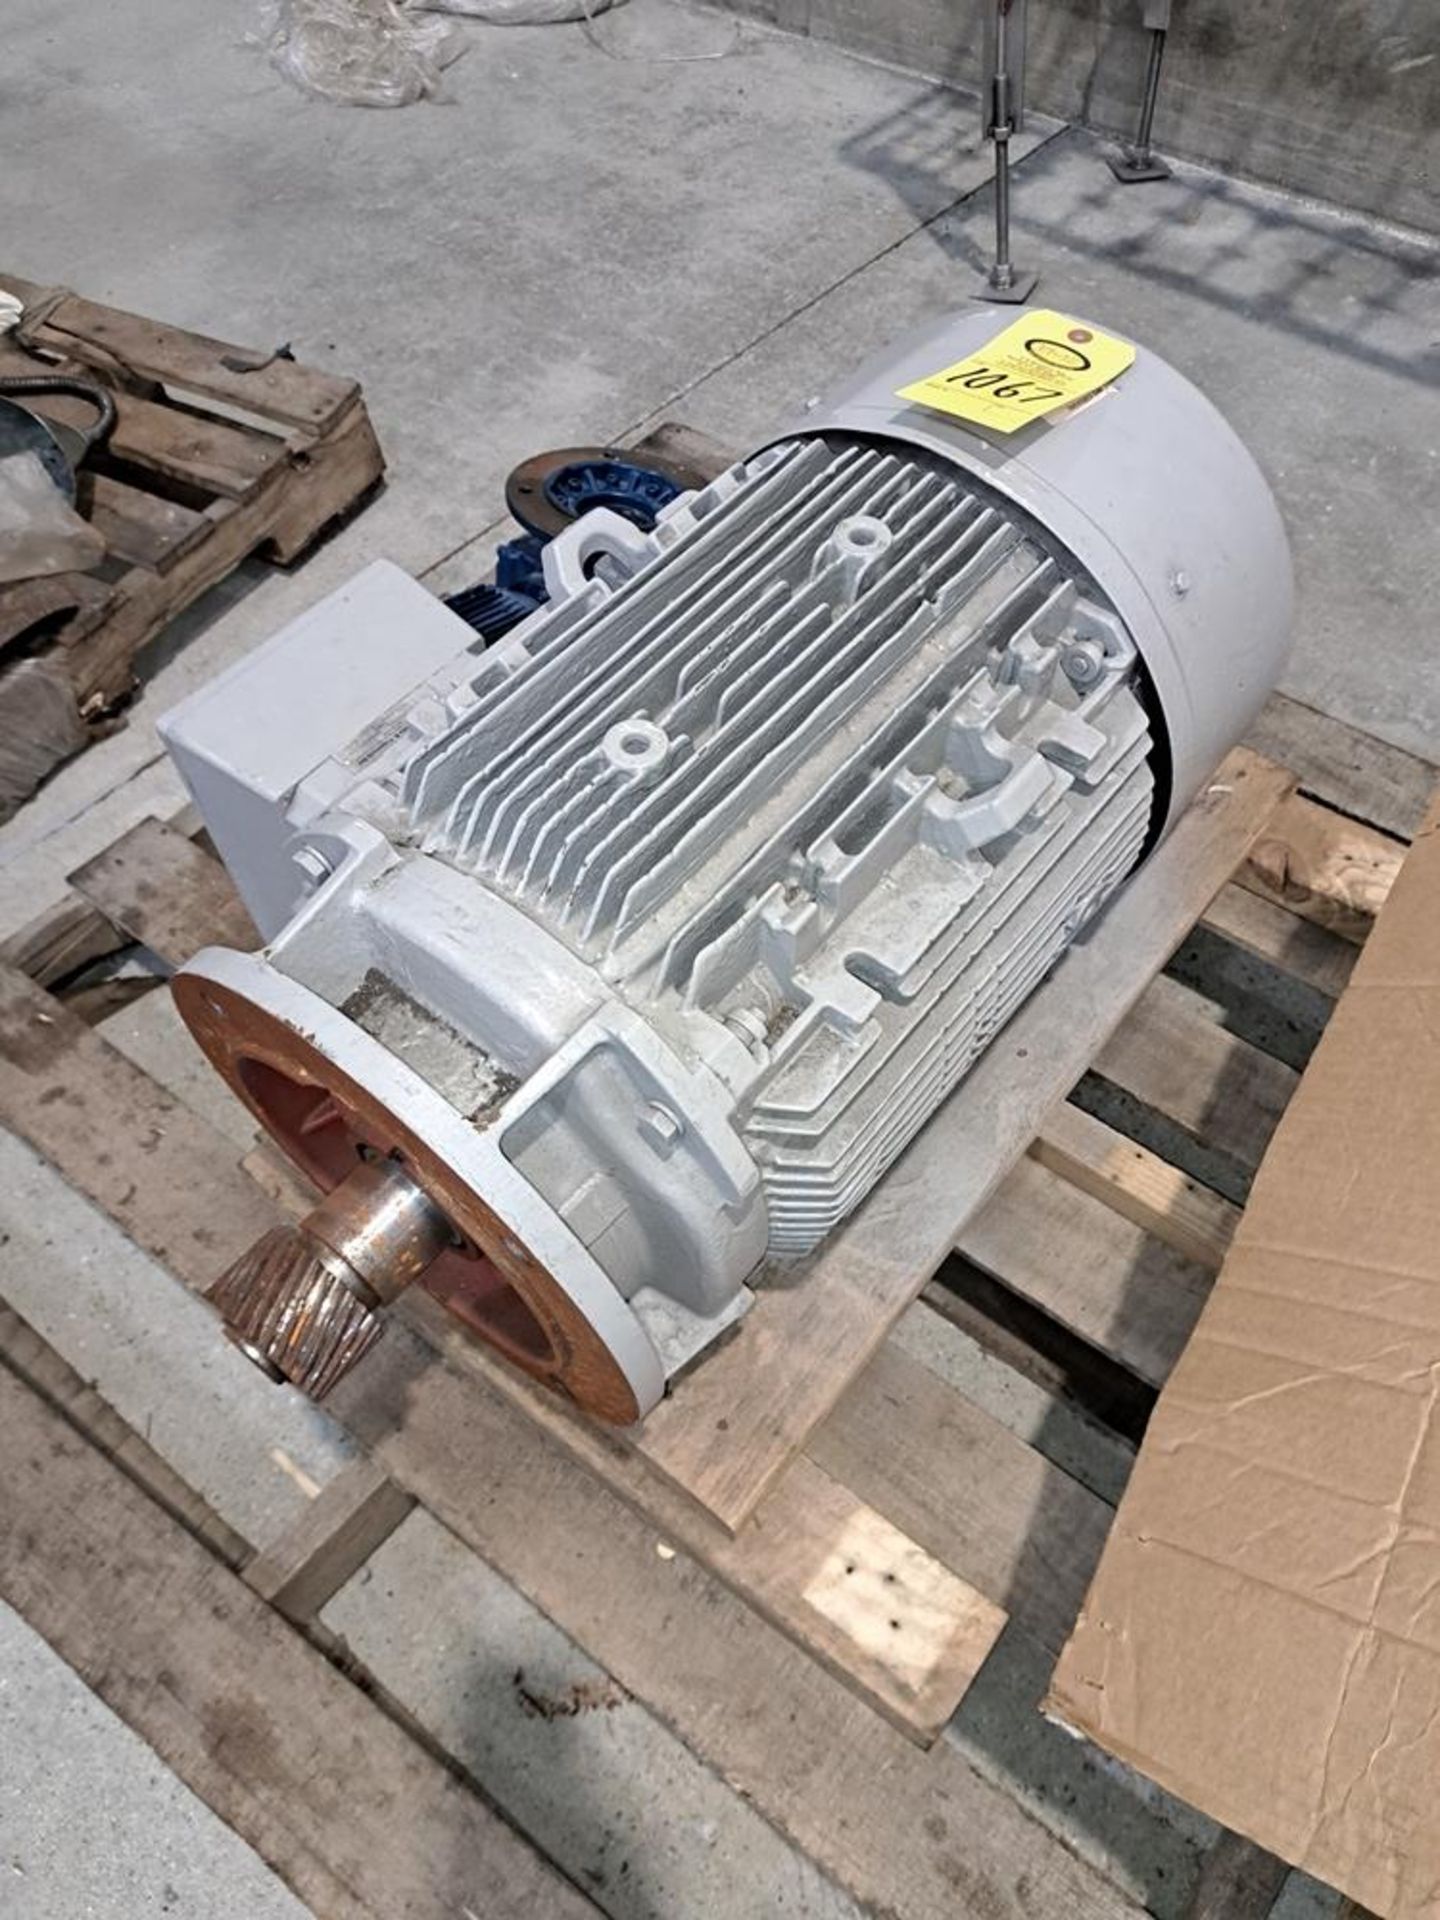 Lot (2) Motors, Gearbox: Required Loading Fee $150.00, Rigger-Norm Pavlish, Nebraska Stainless (